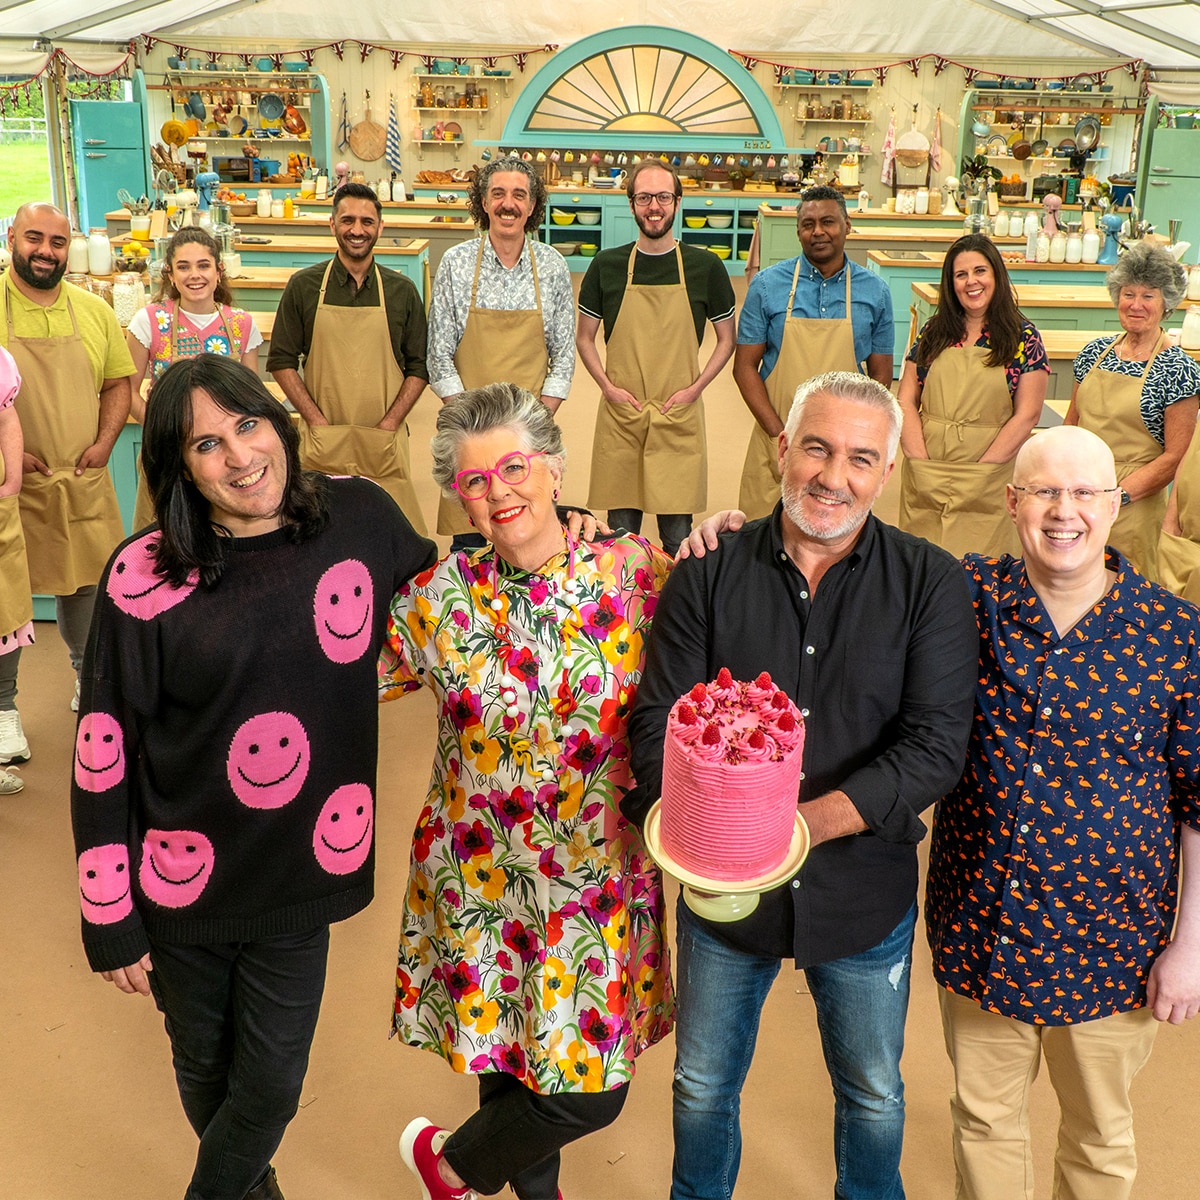 Paul Hollywood, Prue Leith, Season 5, The Great British Baking Show